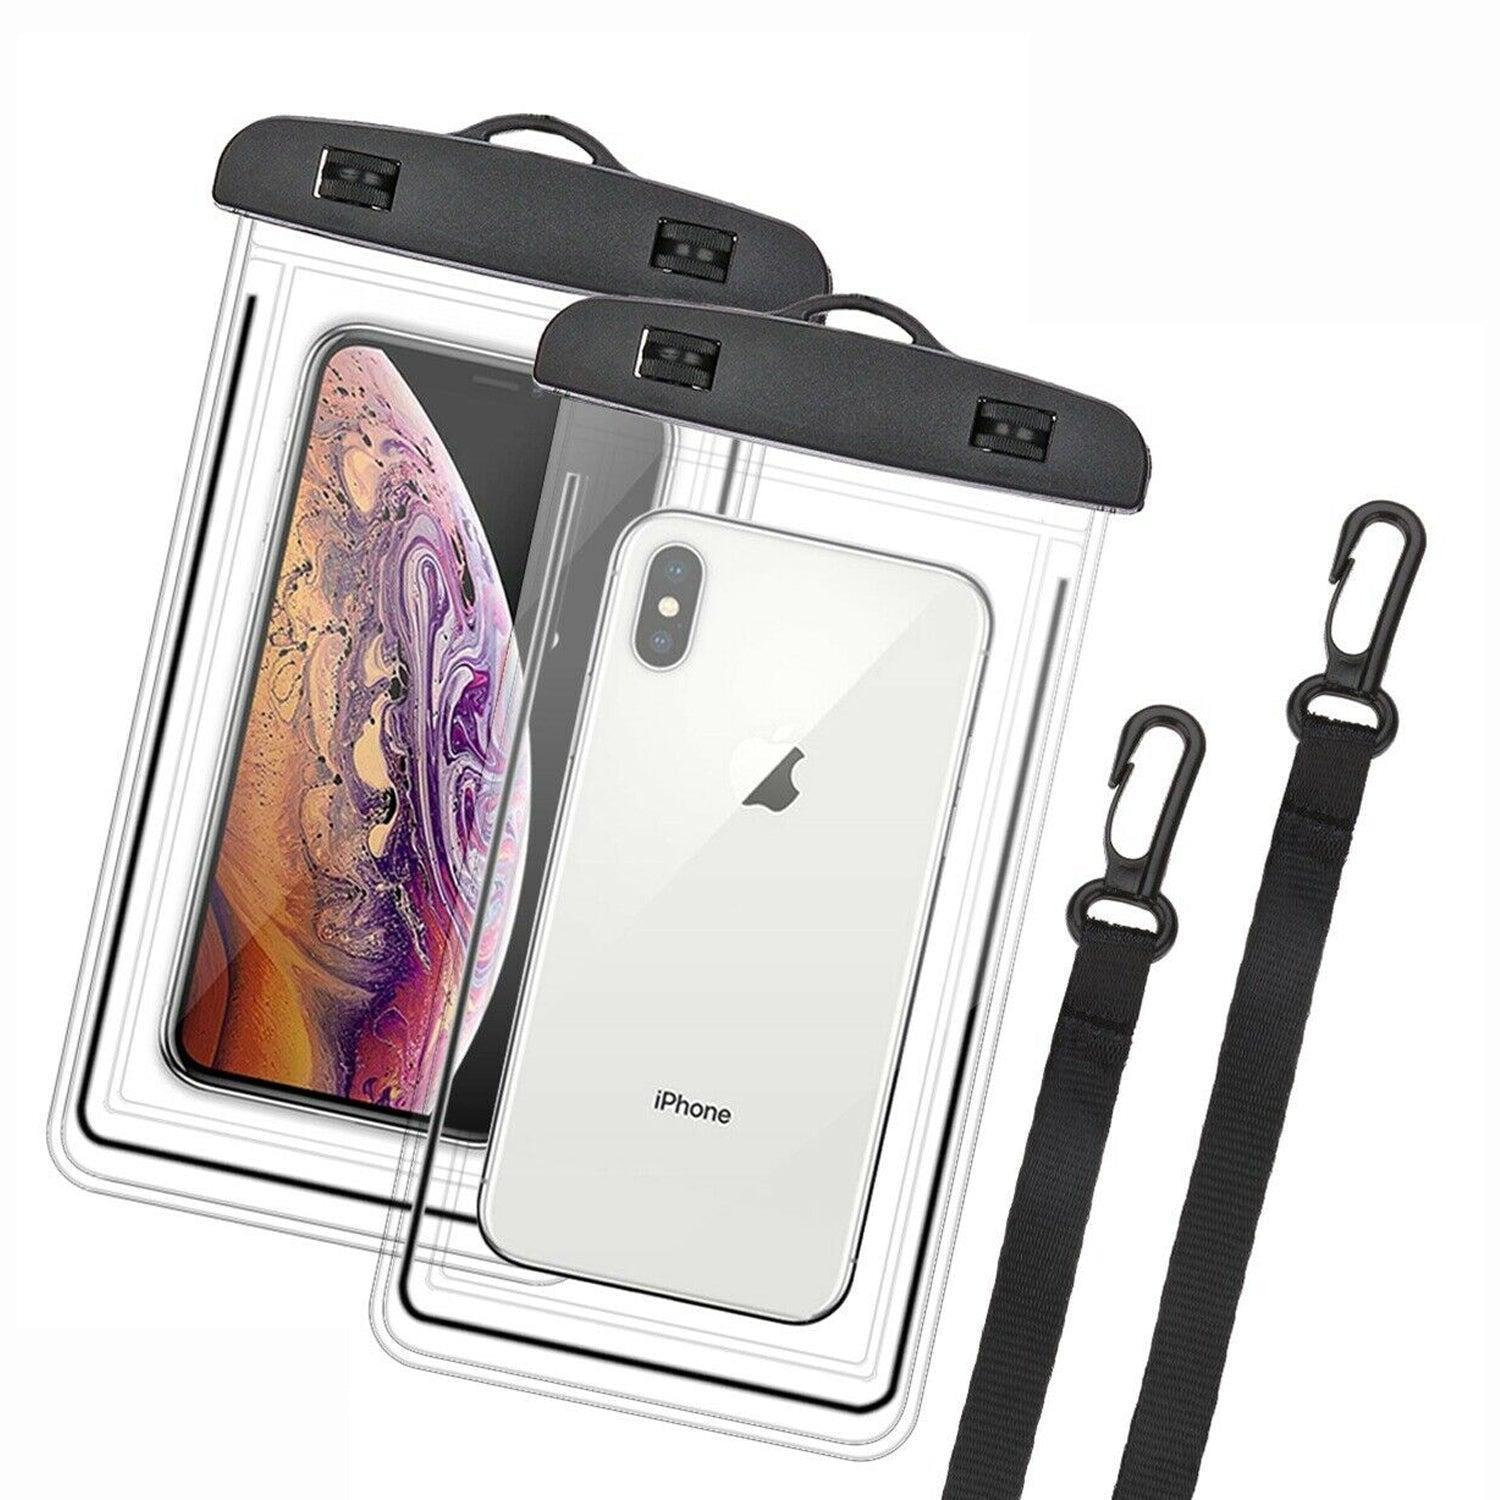 2x Waterproof Phone Pouch Dry Bag Portable Lanyard for iPhone 13/12/11/XS Max/XR